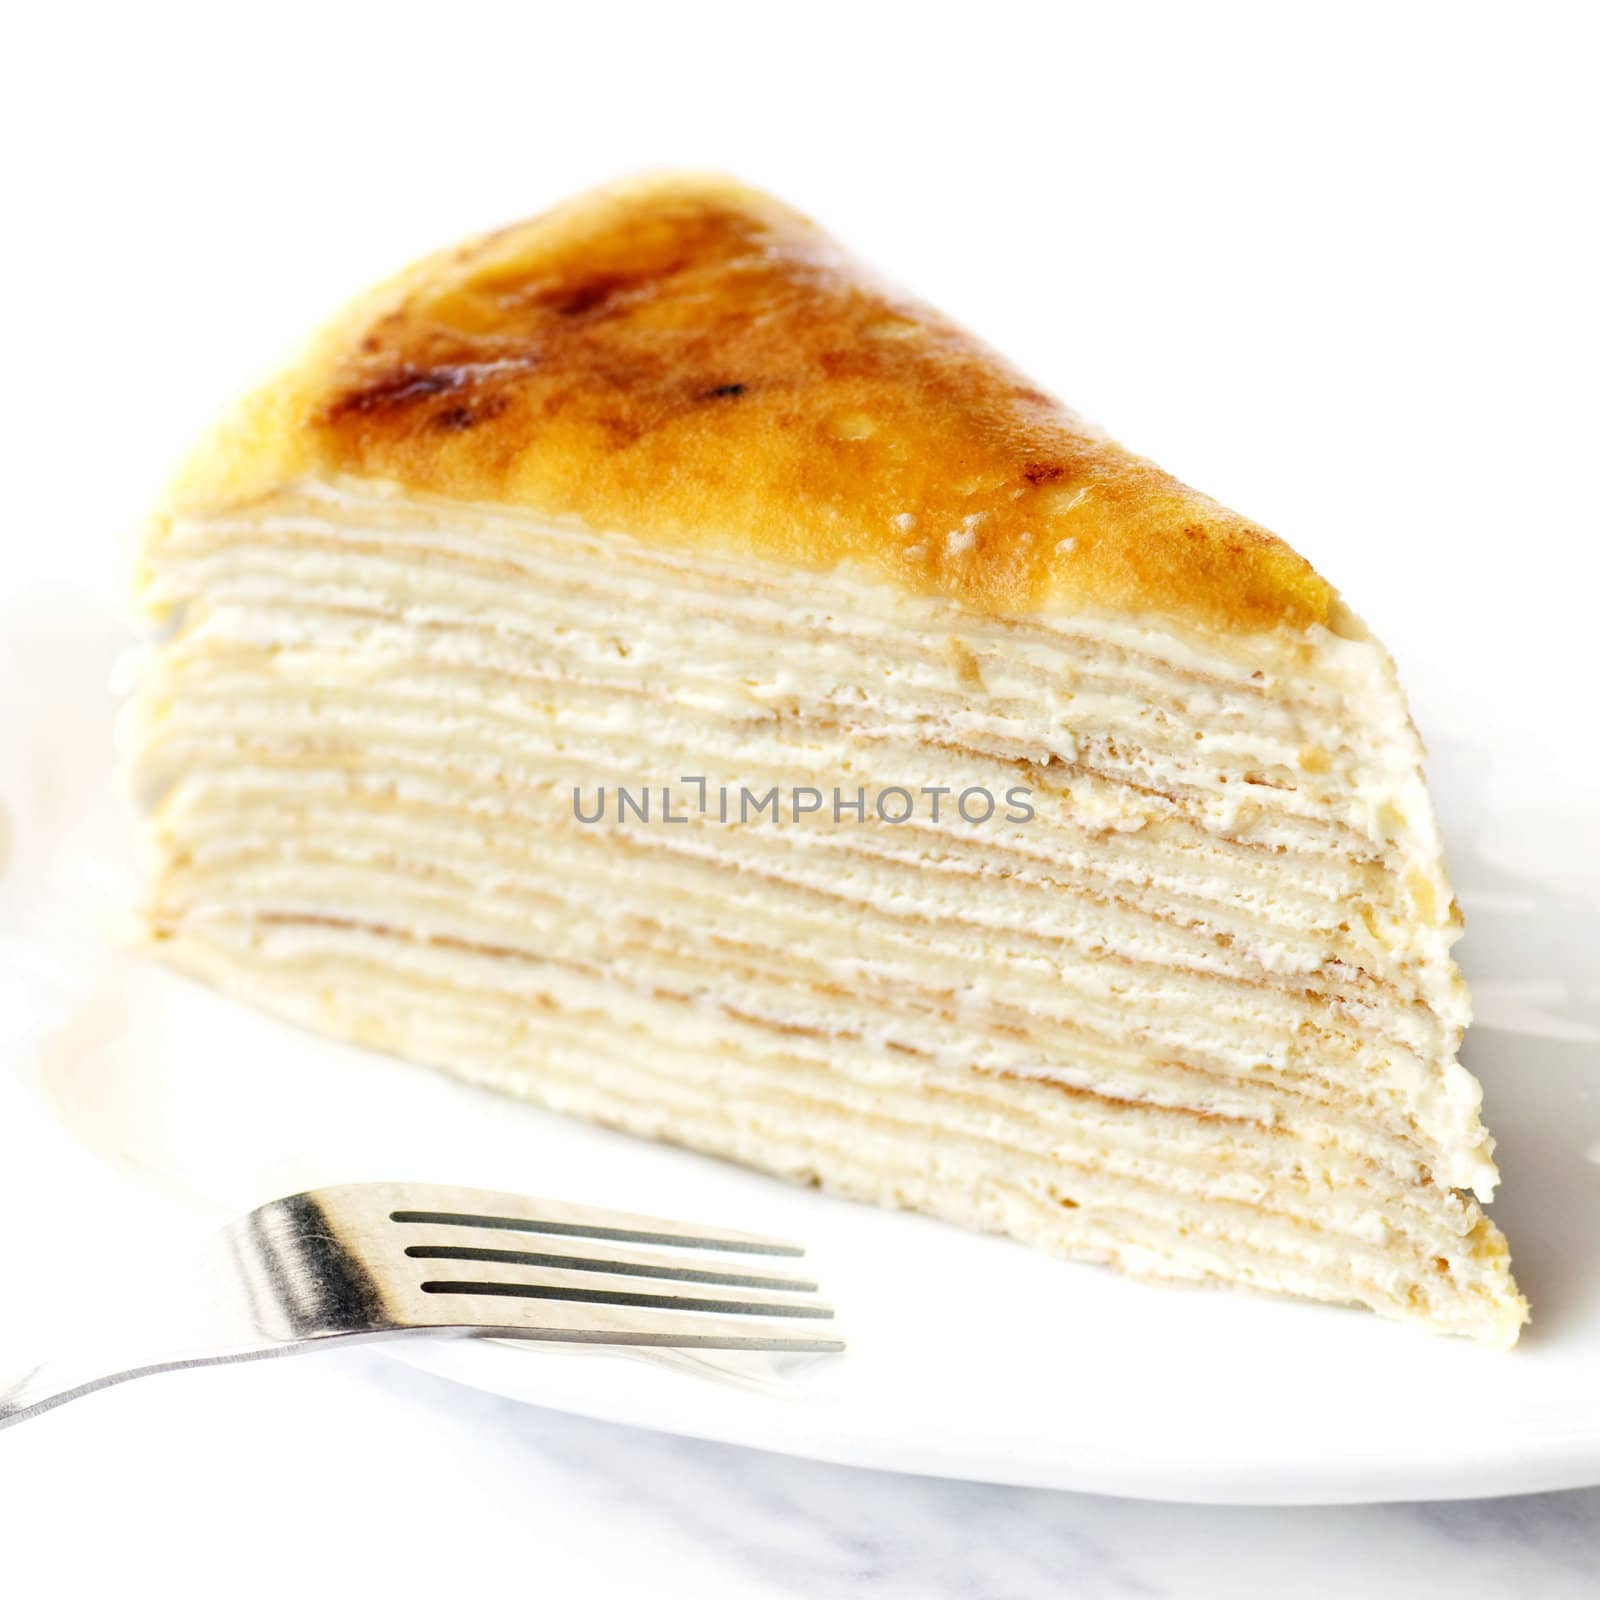 Thousand layers cake, famous French cake in Malacca, Malaysia.